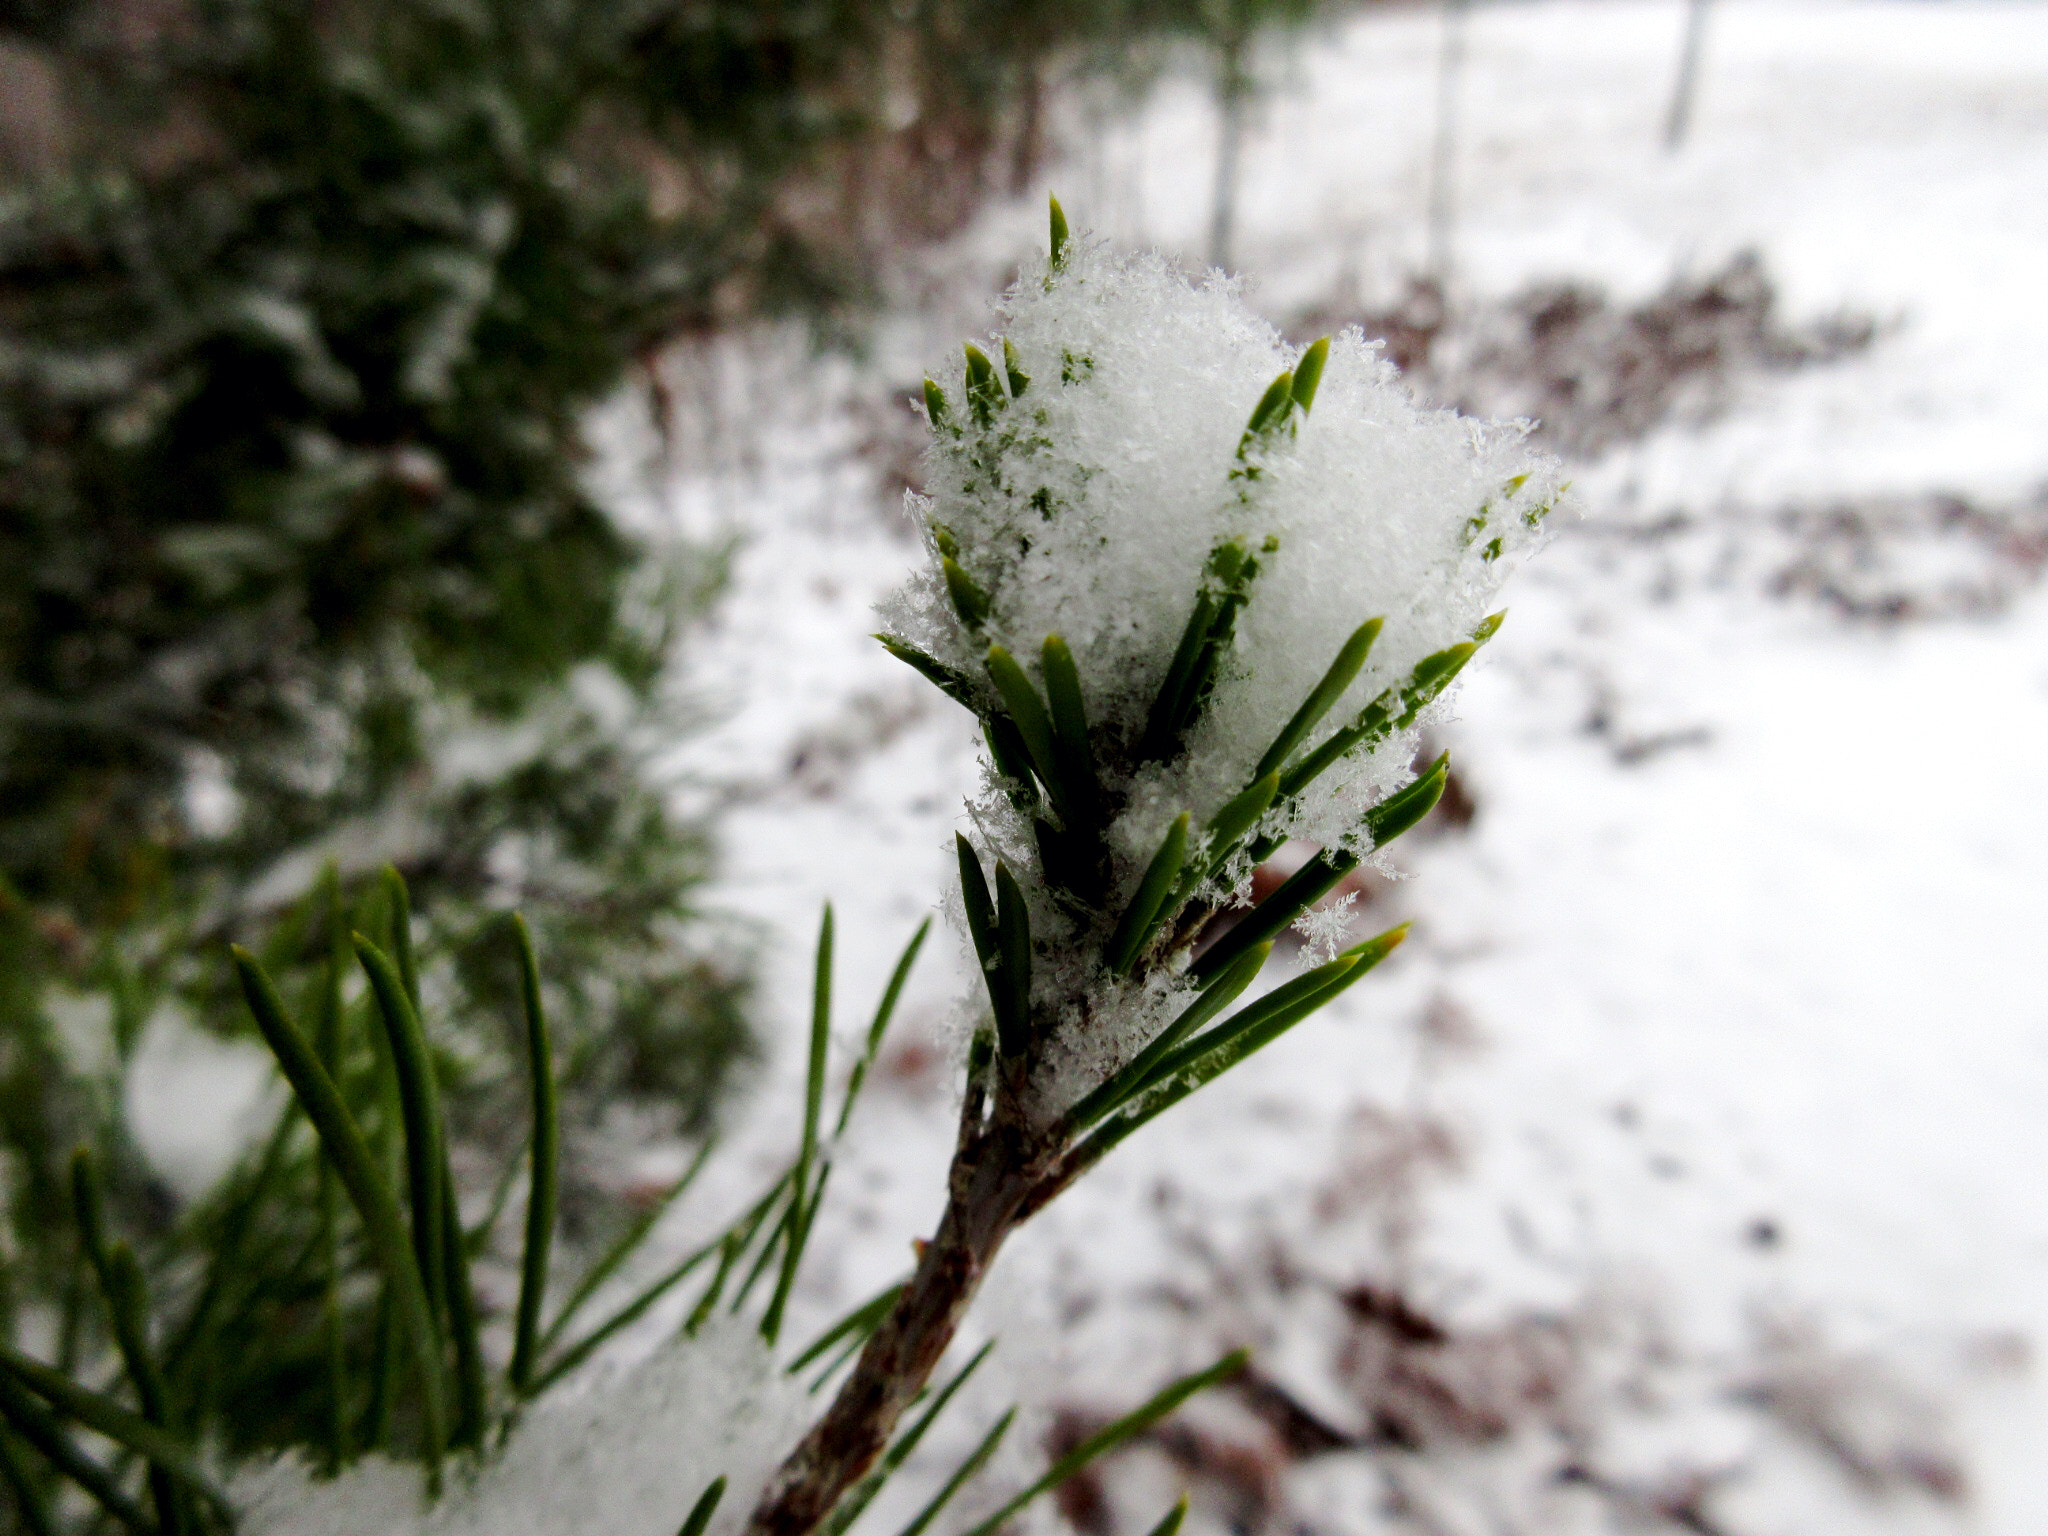 Canon PowerShot ELPH 360 HS (IXUS 285 HS / IXY 650) sample photo. It's a snow cone not a pine cone photography